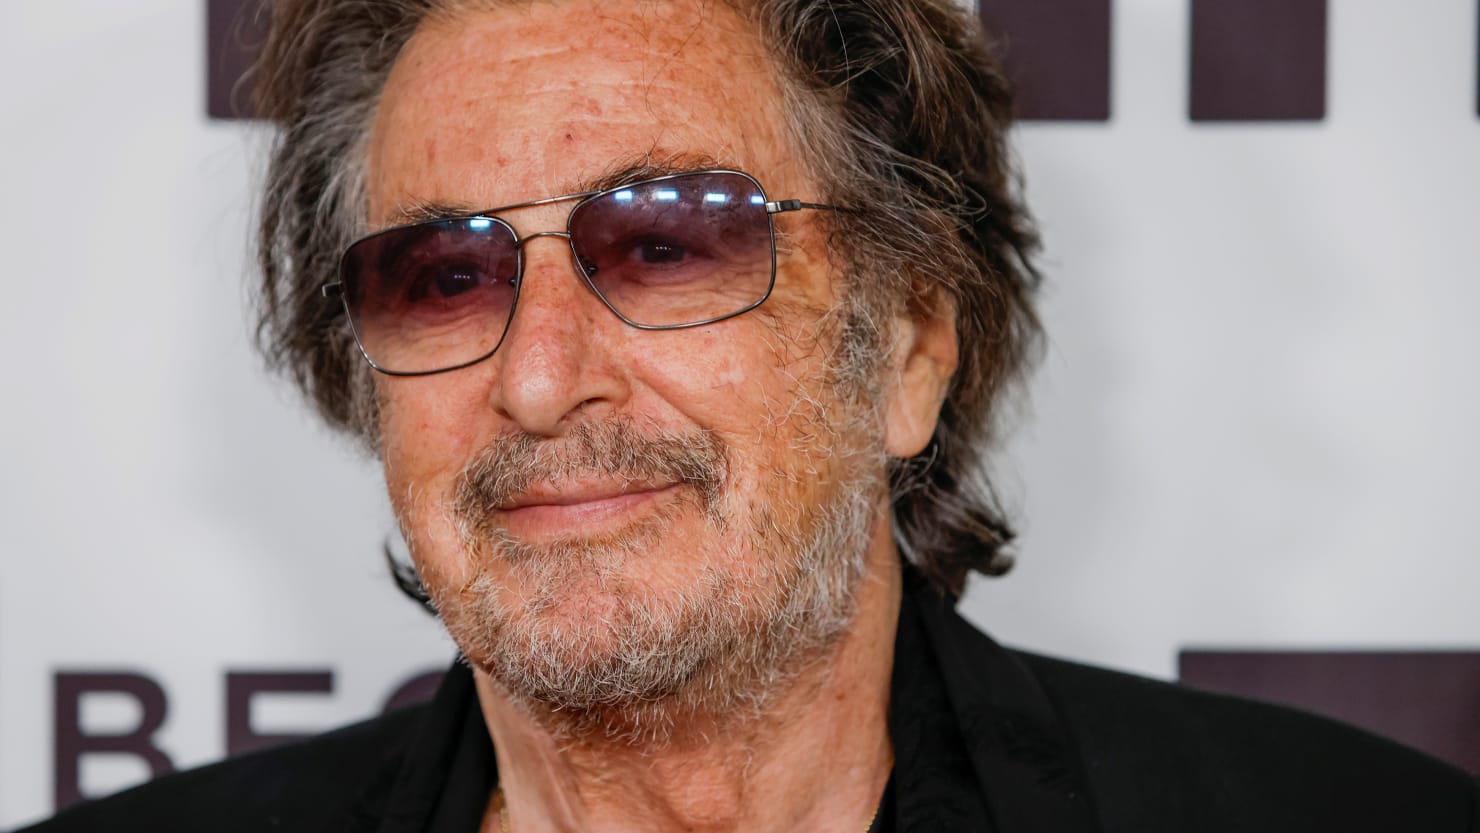 Al Pacino, 82, Is Having a Baby with His 29-Year-Old Girlfriend